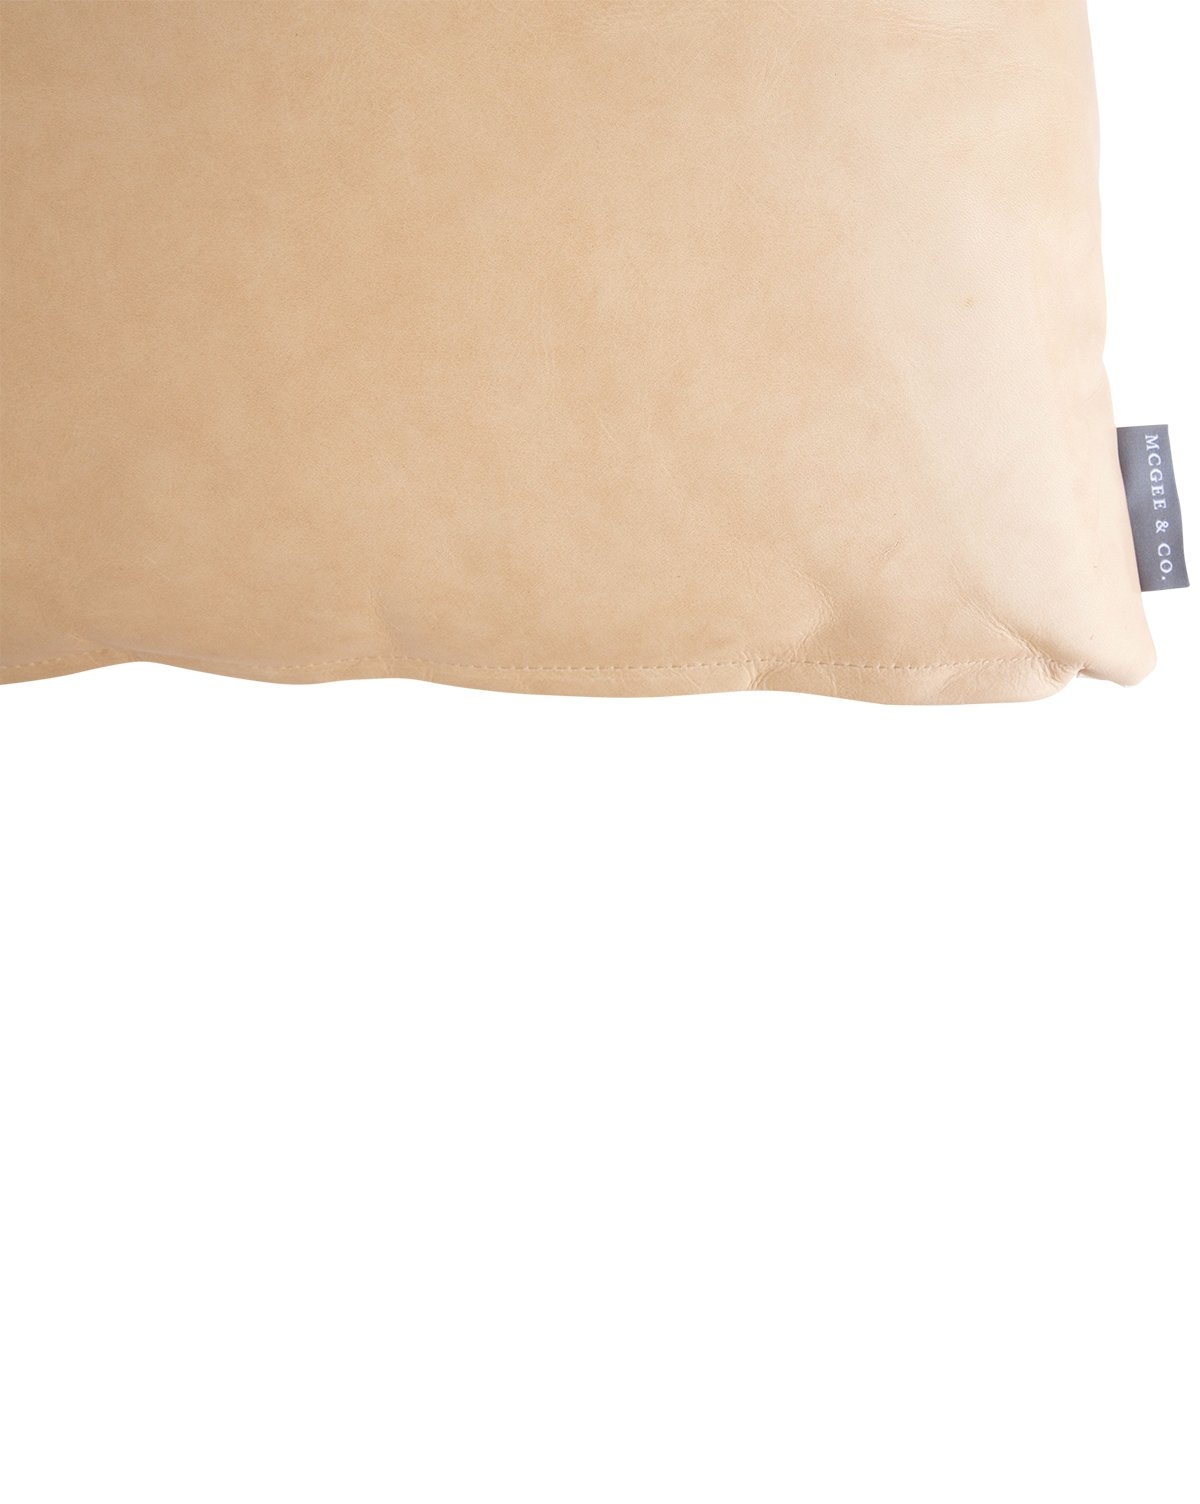 PALOMINO LEATHER PILLOW COVER WITH DOWN INSERT, 14" x 20" - Image 1